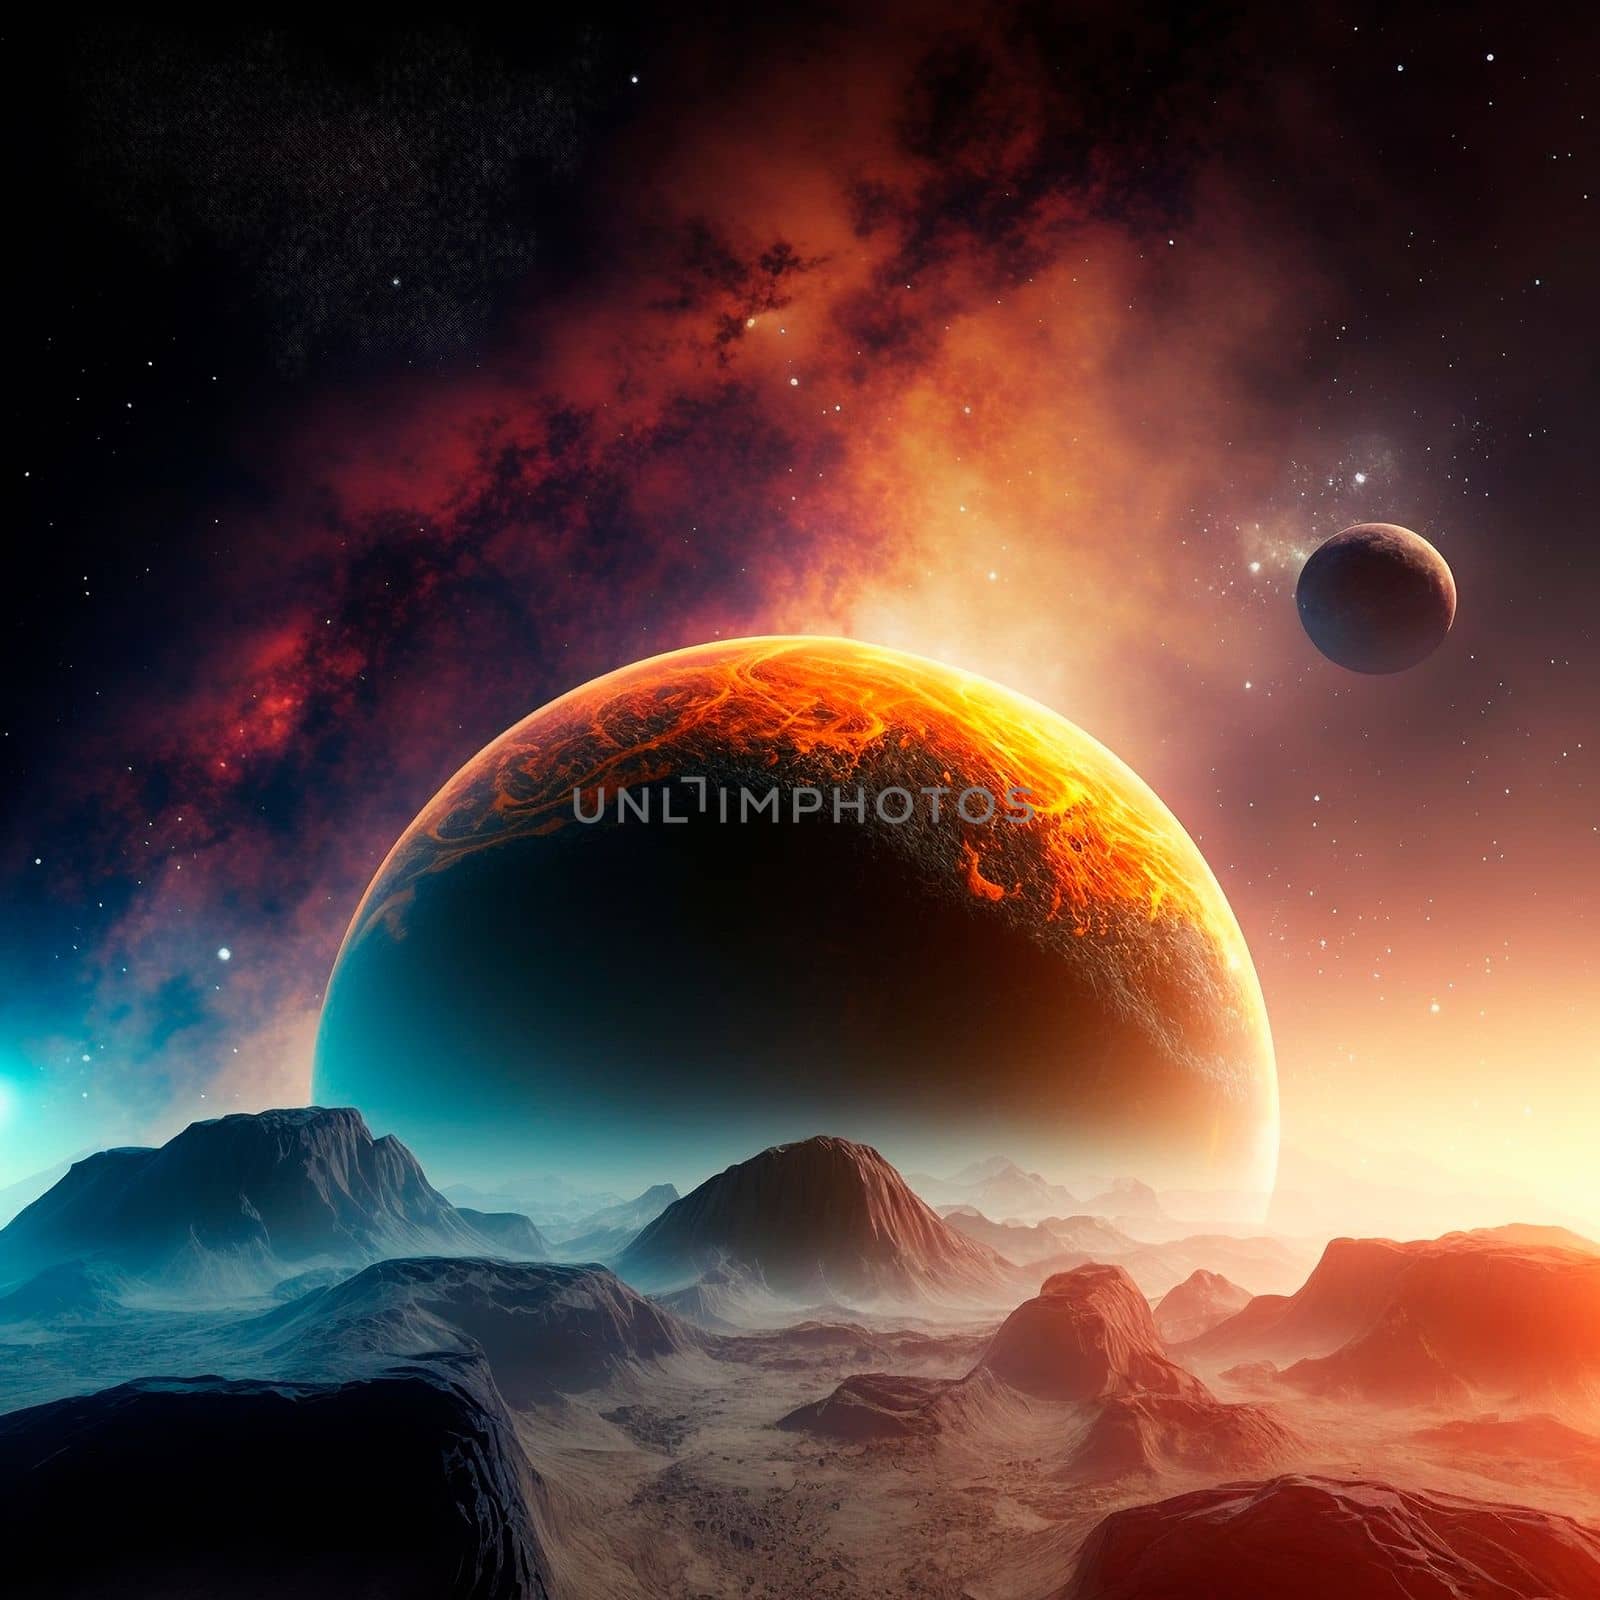 An unexplored planet in the sky. High quality illustration